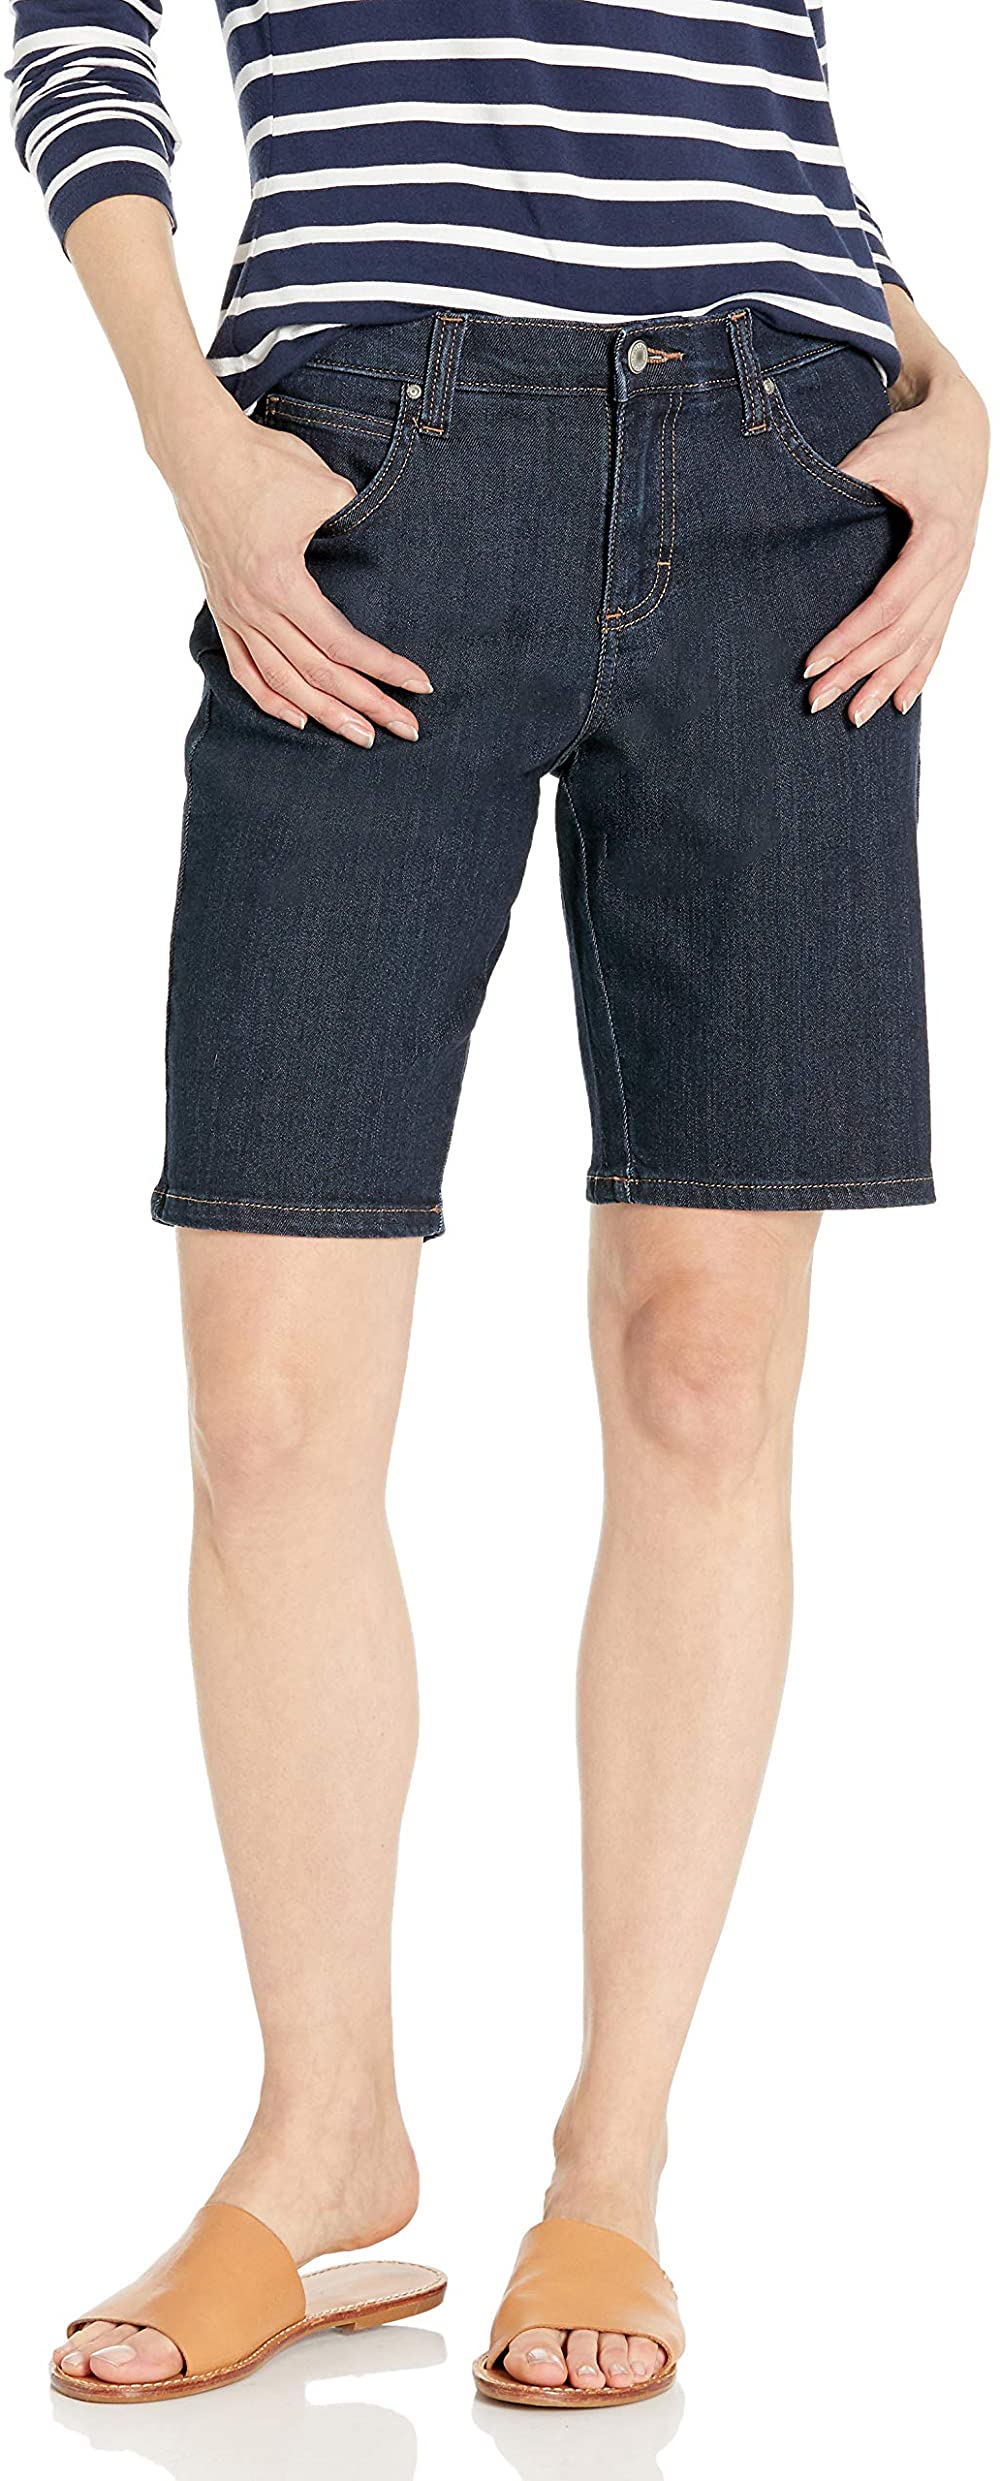 Womens Clothing Shorts Knee-length shorts and long shorts Blue Roman Synthetic Curve Knee Length Stretch Shorts in Navy 